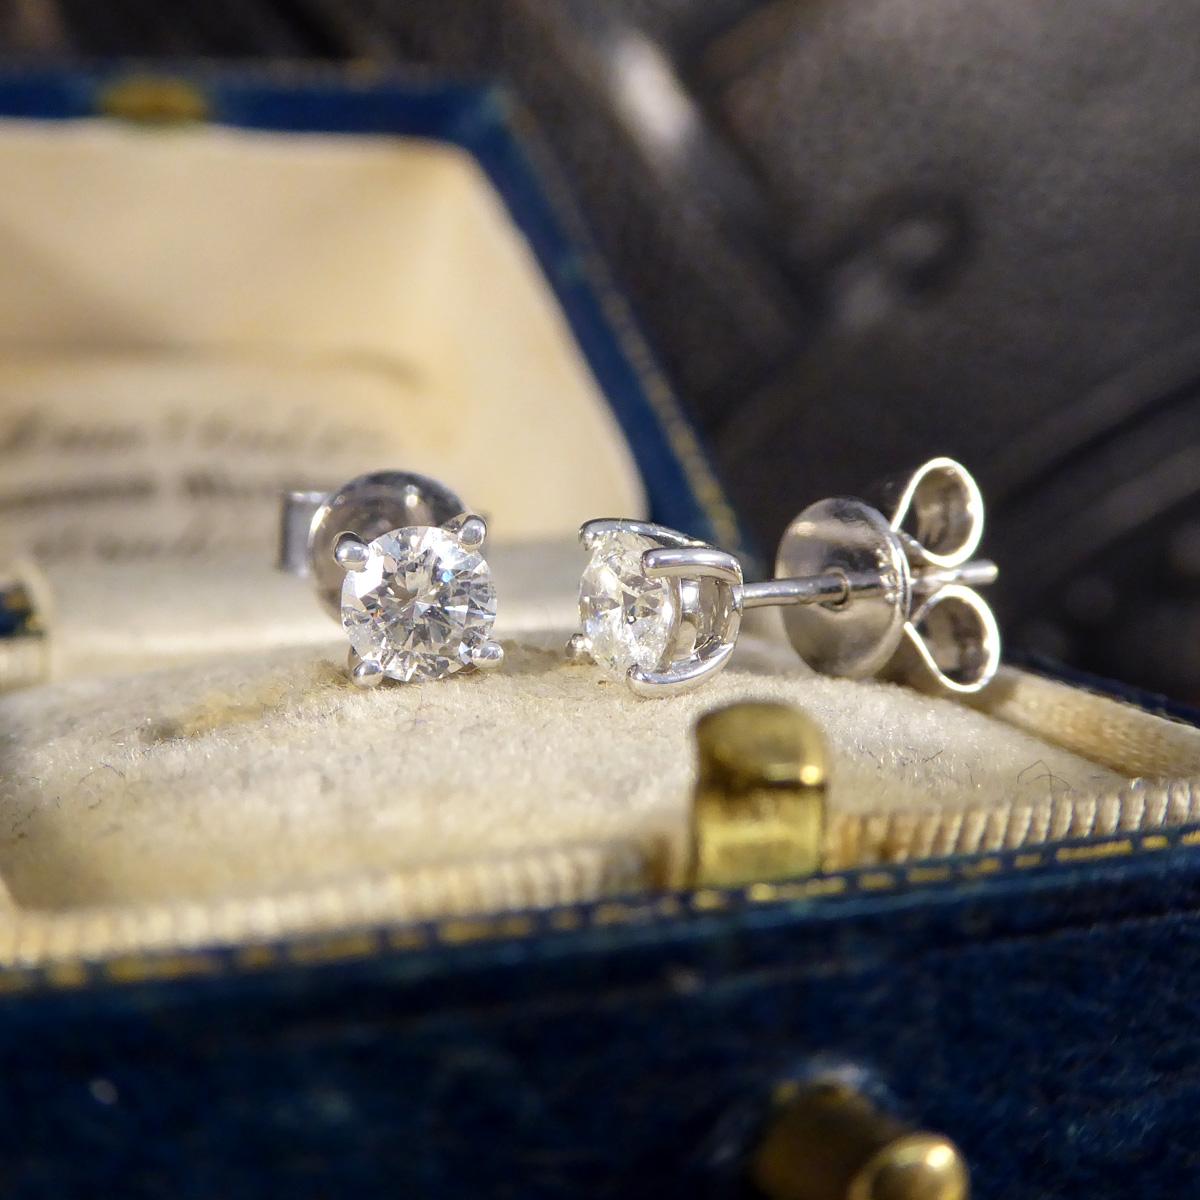 Classic Diamond Stud Earrings in 18ct White Gold In Excellent Condition For Sale In Yorkshire, West Yorkshire